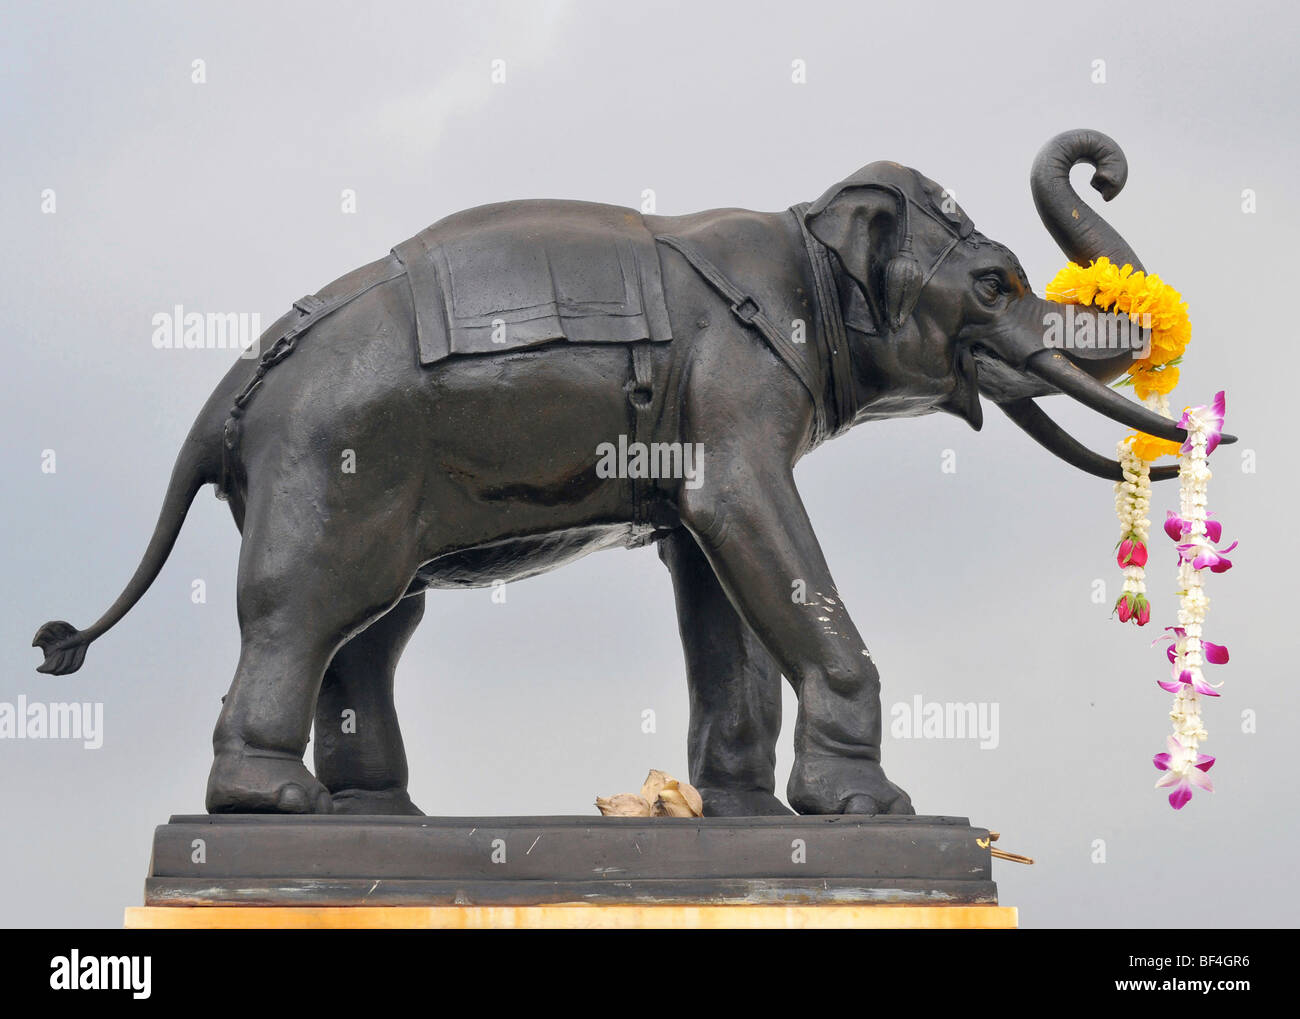 Elephant Statue with flowers Stock Photo